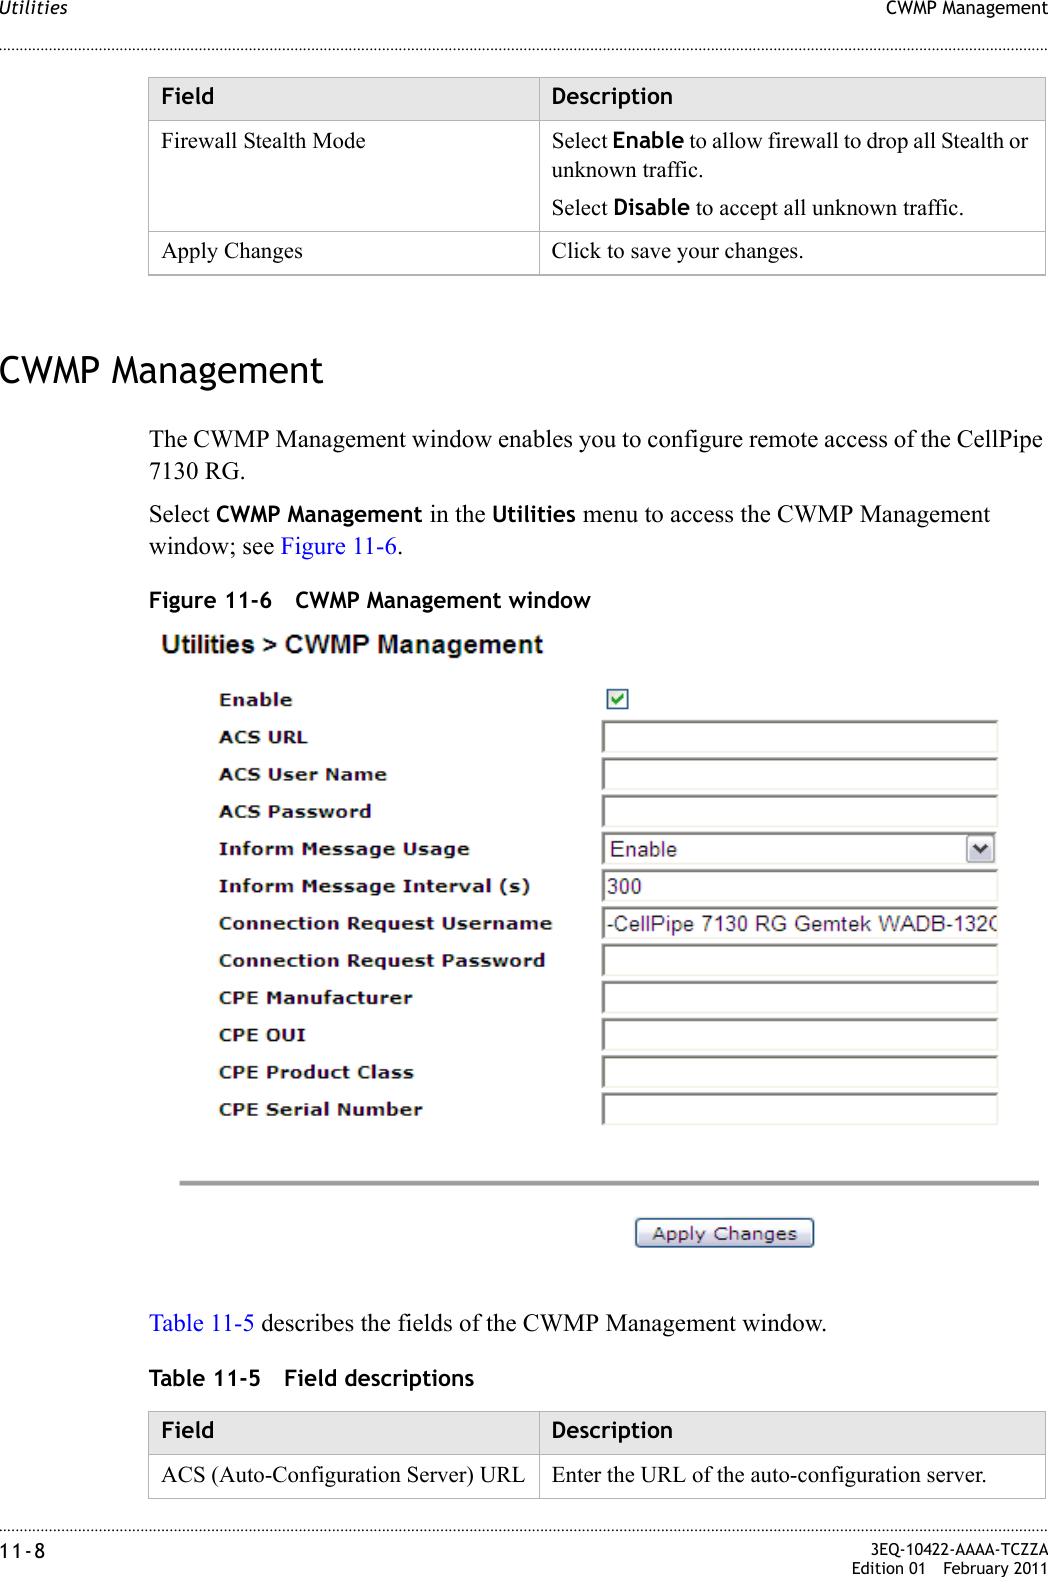 ............................................................................................................................................................................................................................................................CWMP ManagementUtilities11-8  3EQ-10422-AAAA-TCZZAEdition 01 February 2011............................................................................................................................................................................................................................................................CWMP ManagementThe CWMP Management window enables you to configure remote access of the CellPipe 7130 RG.Select CWMP Management in the Utilities menu to access the CWMP Management window; see Figure 11-6.Figure 11-6 CWMP Management windowTable 11-5 describes the fields of the CWMP Management window.Table 11-5 Field descriptionsFirewall Stealth Mode Select Enable to allow firewall to drop all Stealth or unknown traffic. Select Disable to accept all unknown traffic.Apply Changes Click to save your changes.Field DescriptionField DescriptionACS (Auto-Configuration Server) URL Enter the URL of the auto-configuration server.